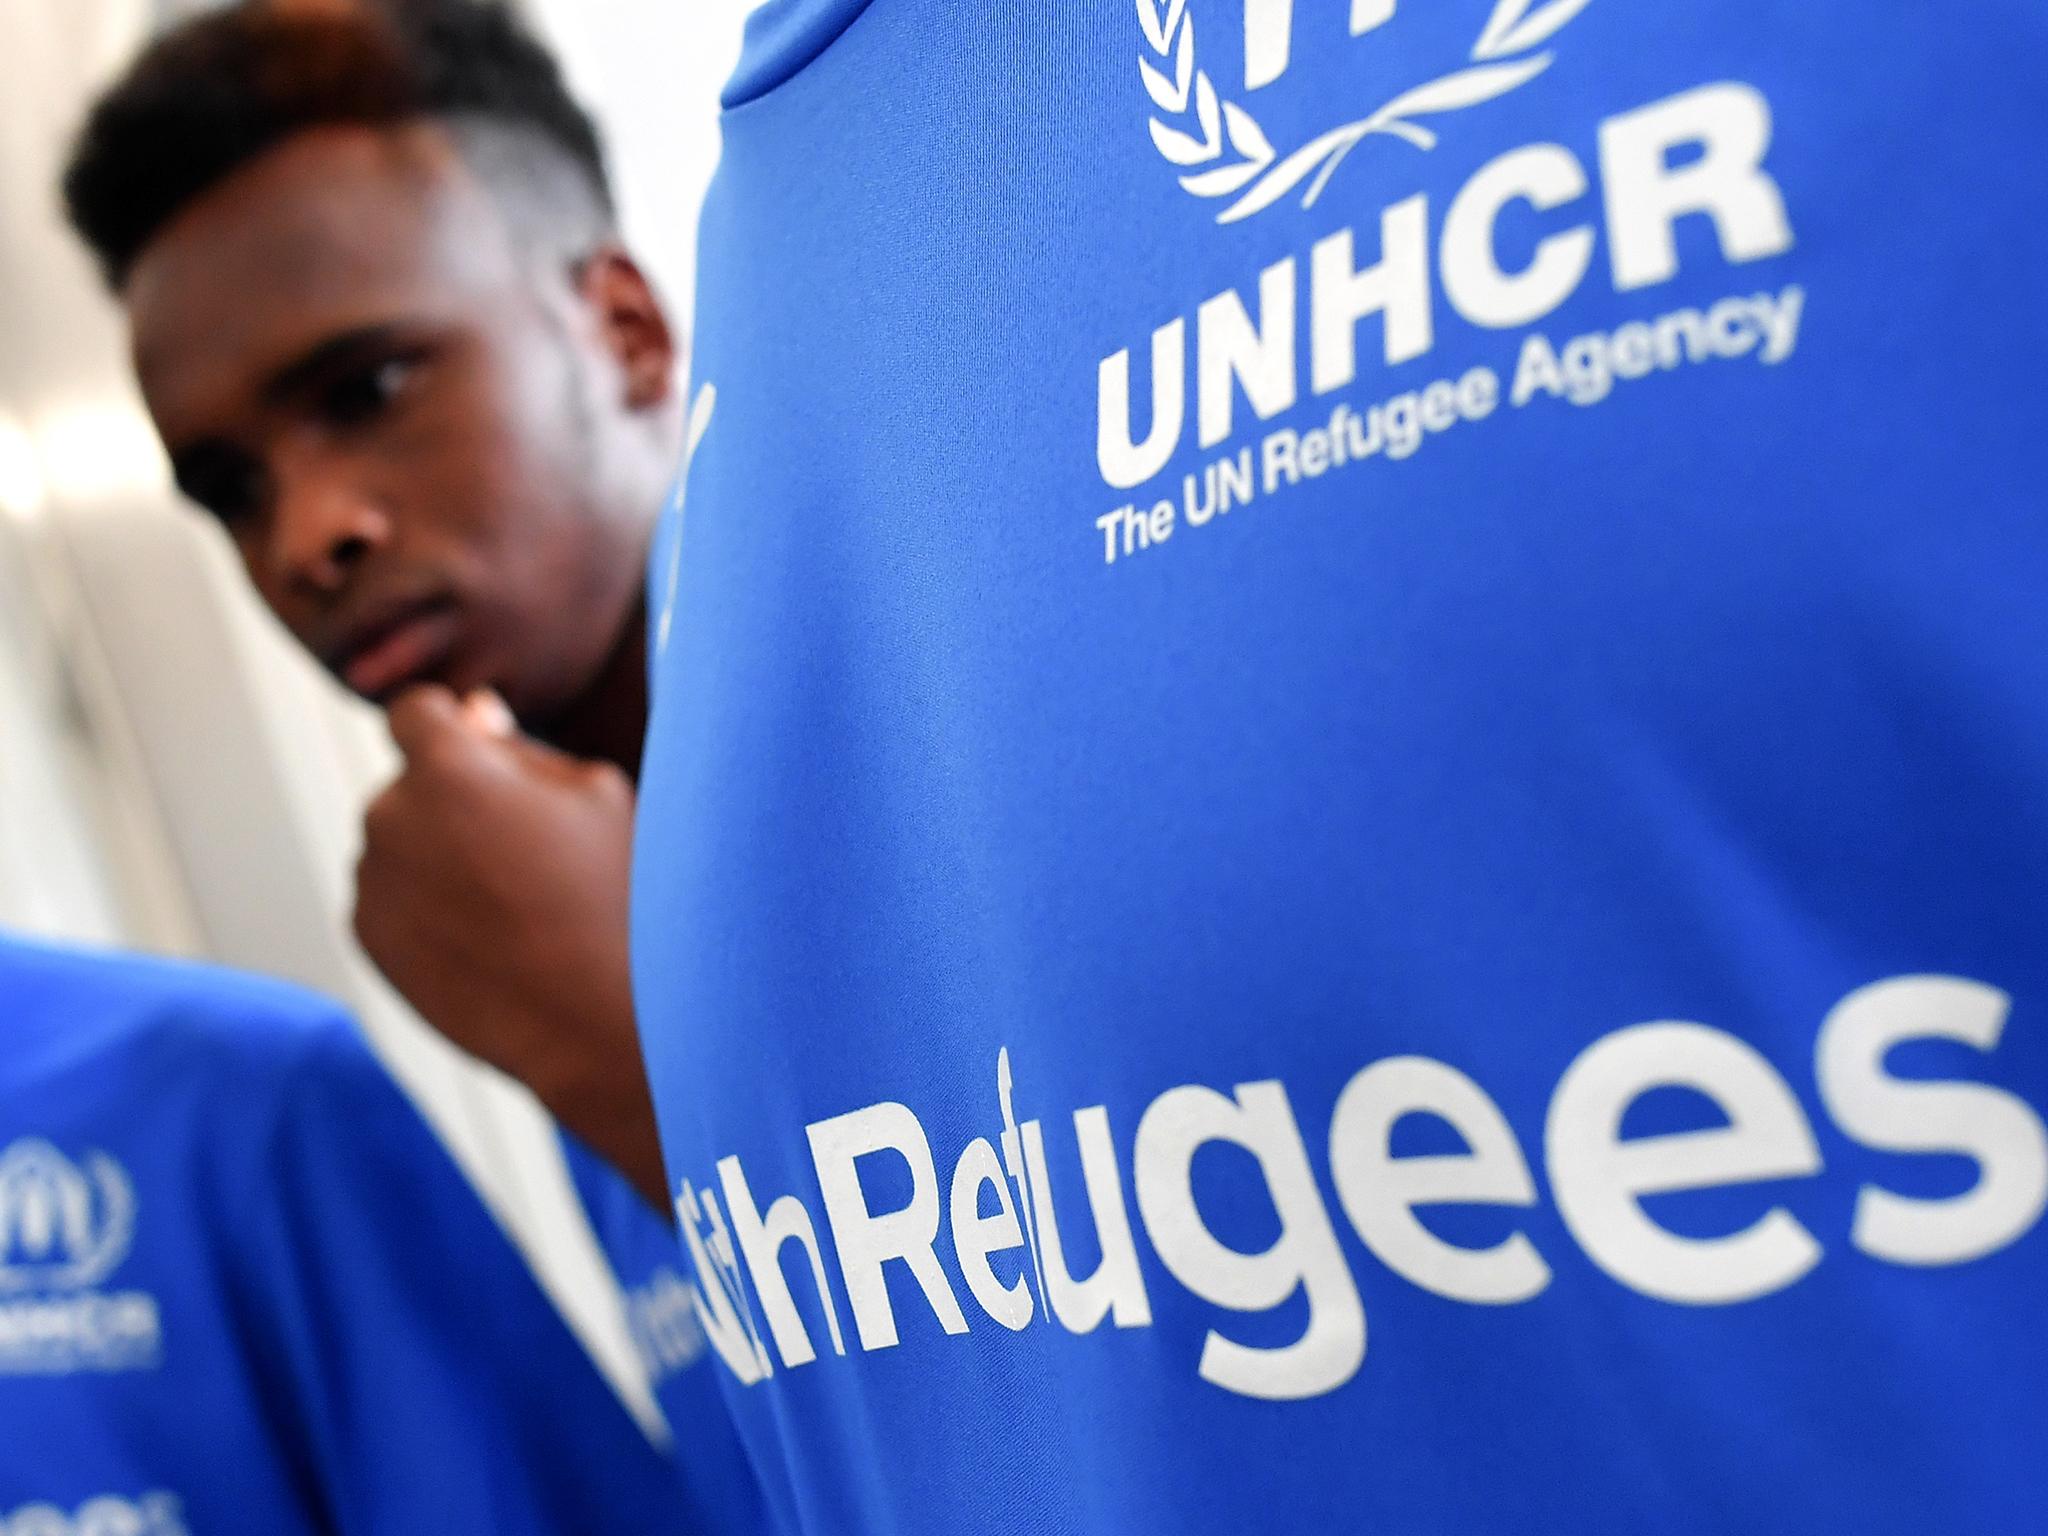 Football clubs will welcome refugees to games this weekend as part of Amnesty International's initiation